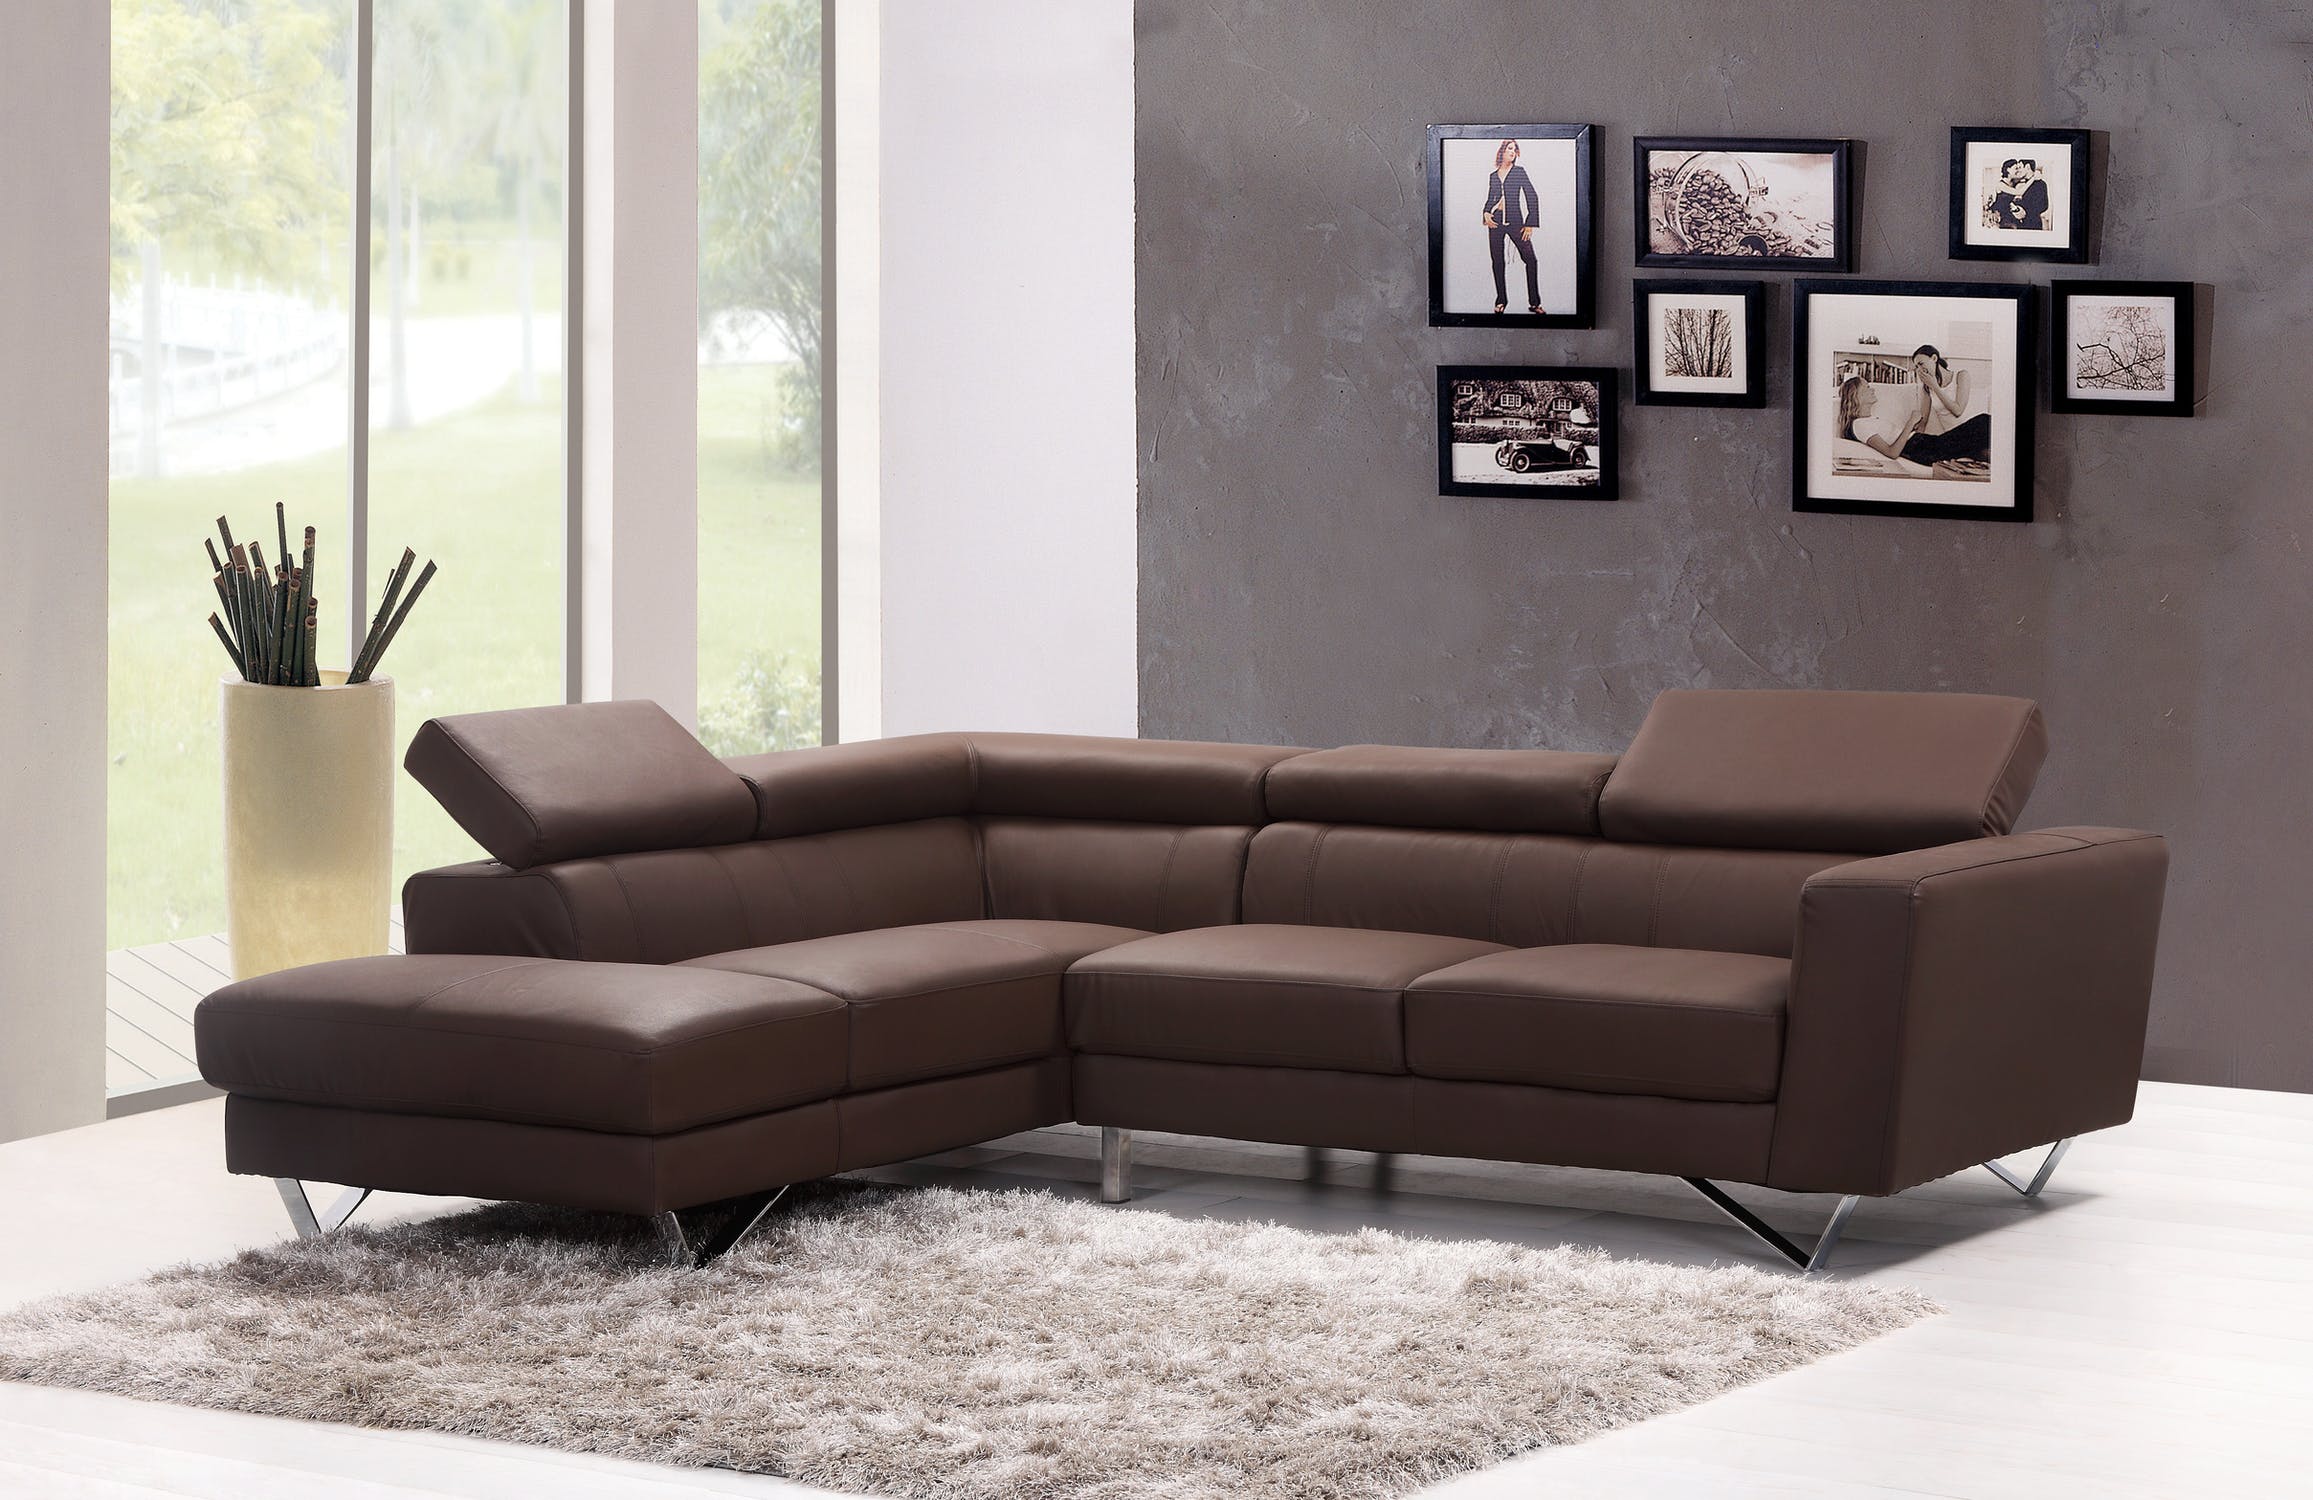 A large brown leather corner sofa with a rug